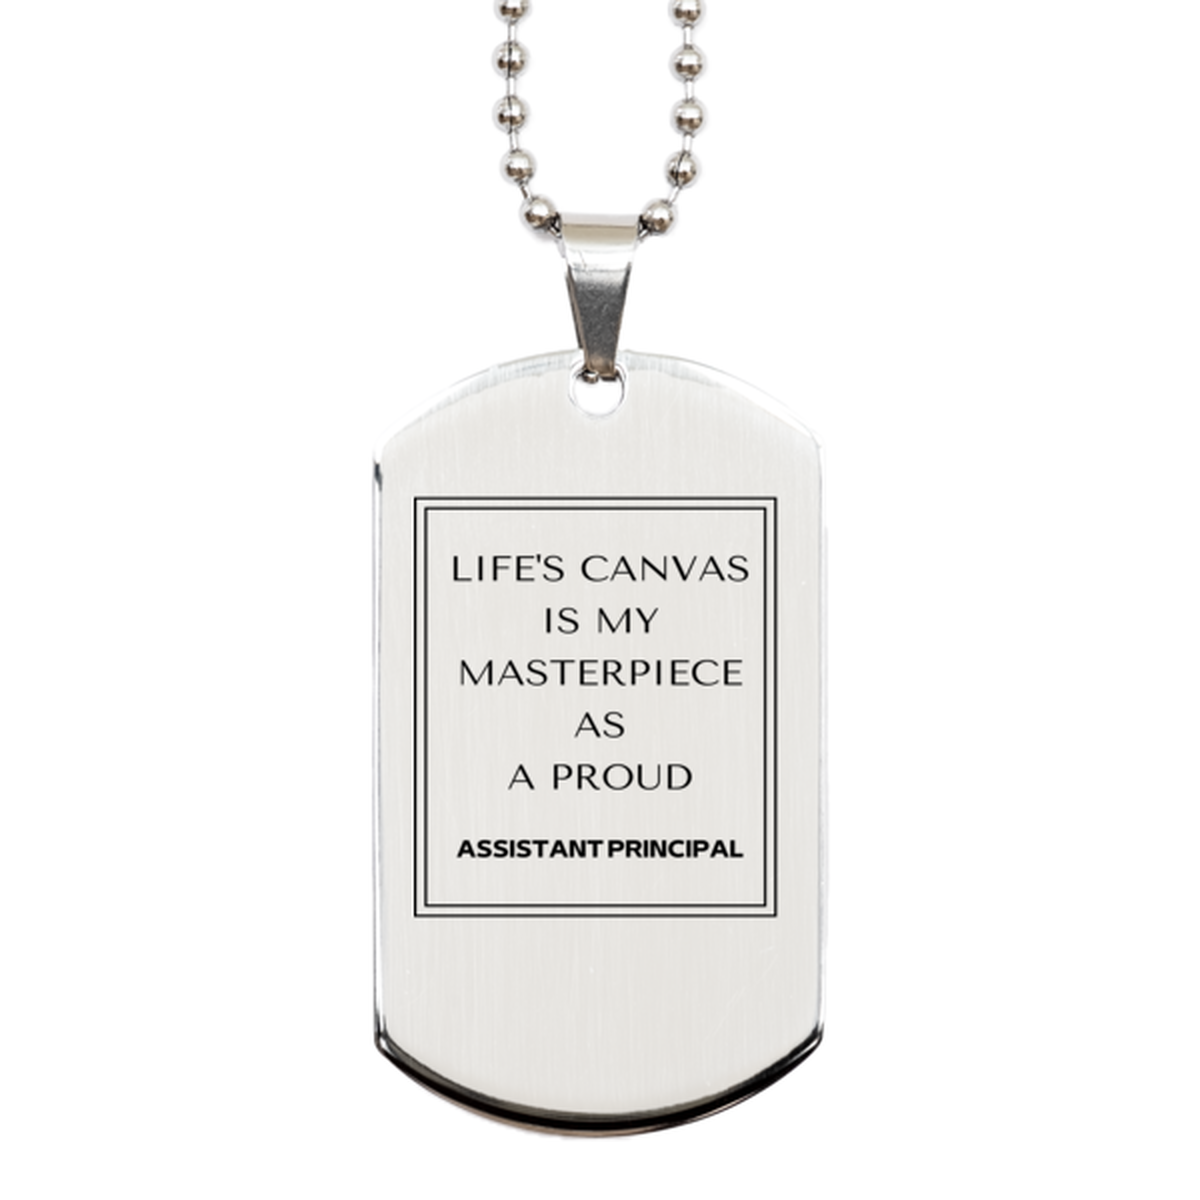 Proud Assistant Principal Gifts, Life's canvas is my masterpiece, Epic Birthday Christmas Unique Silver Dog Tag For Assistant Principal, Coworkers, Men, Women, Friends